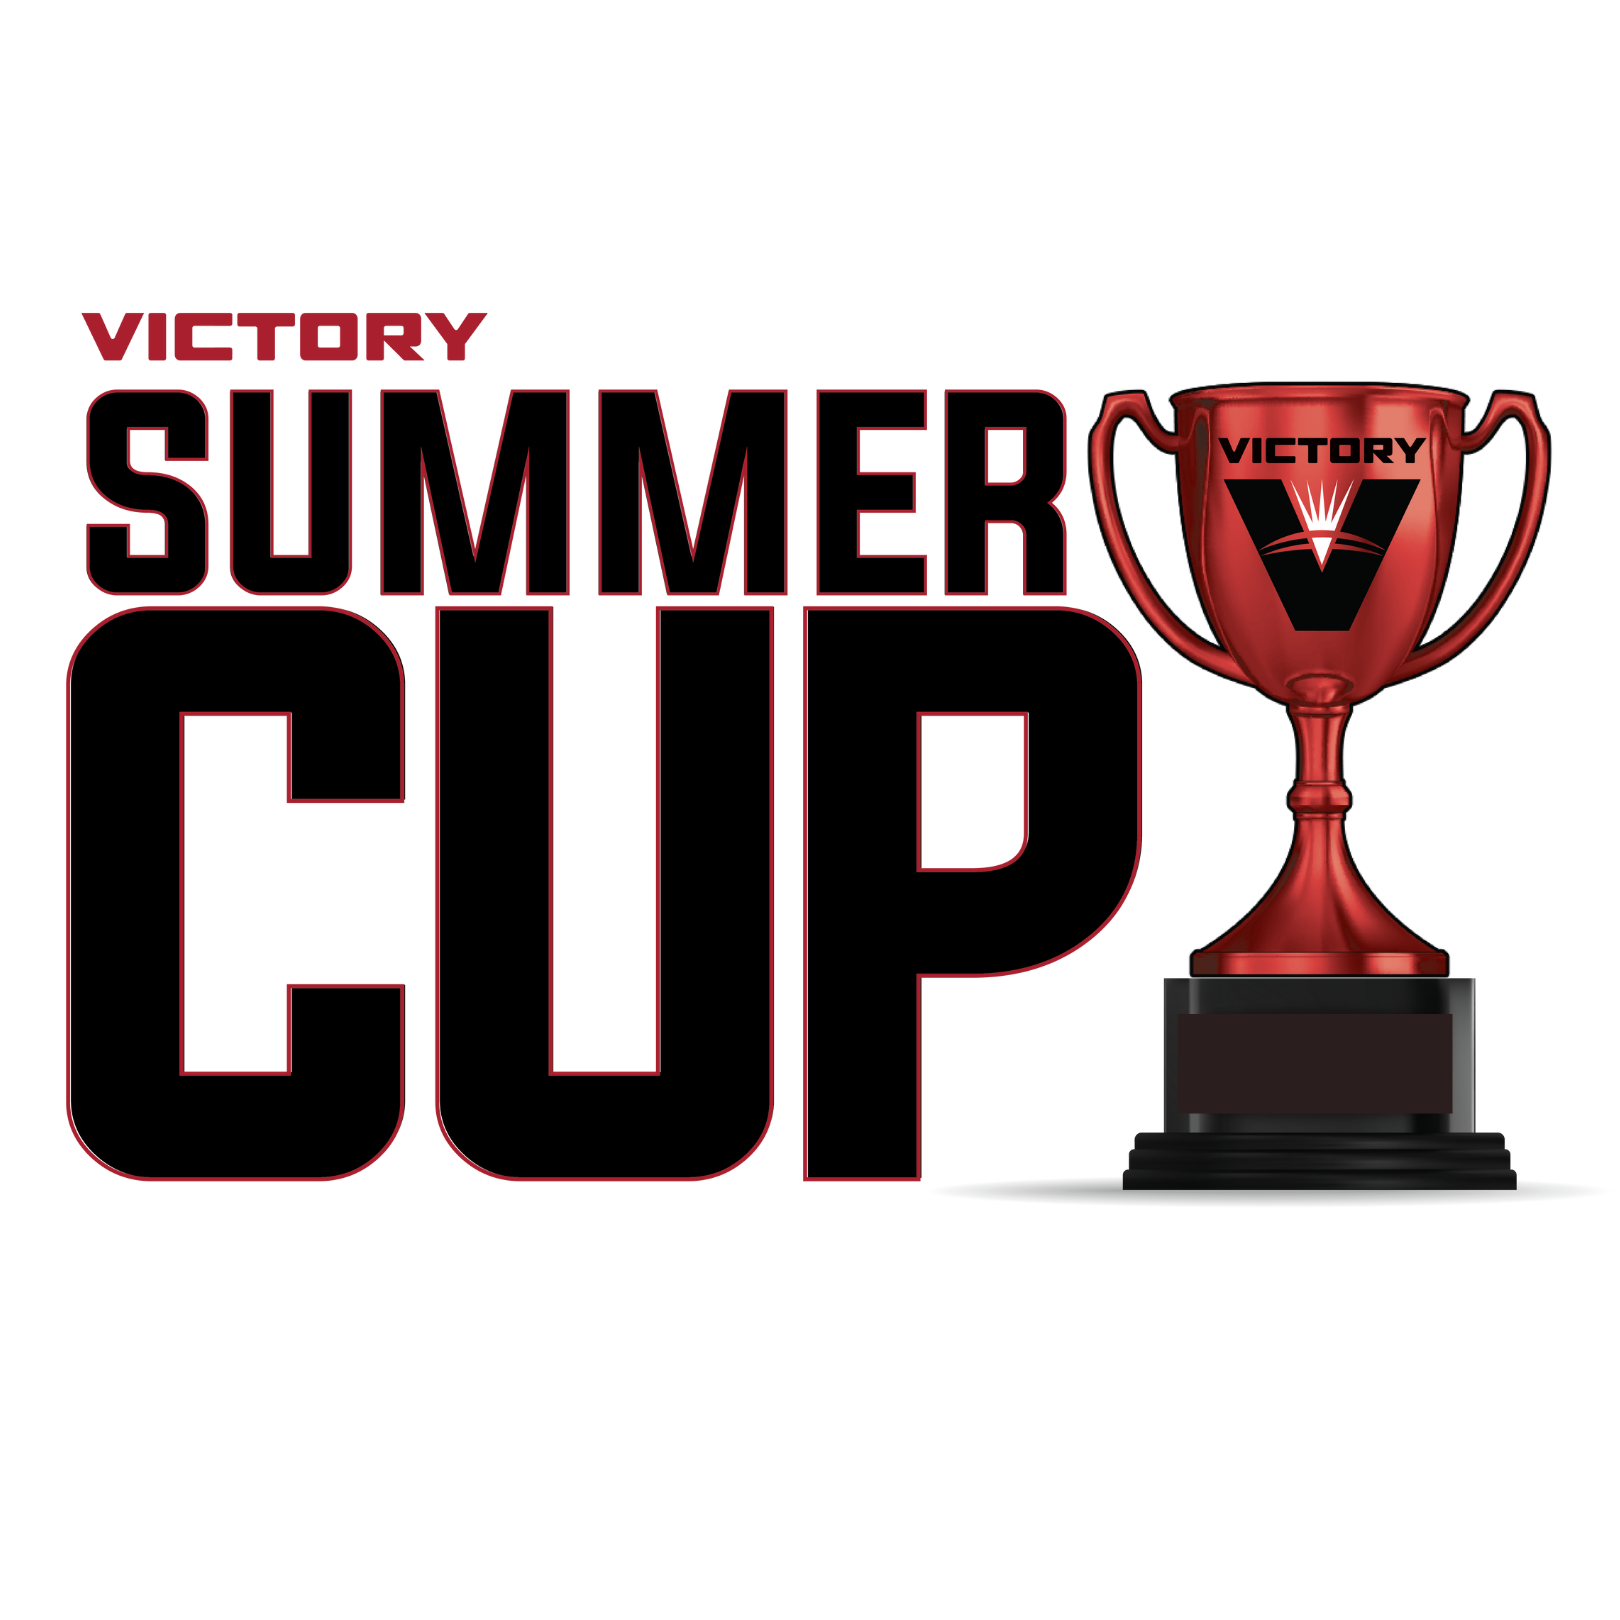 VICTORY SUMMER CUP